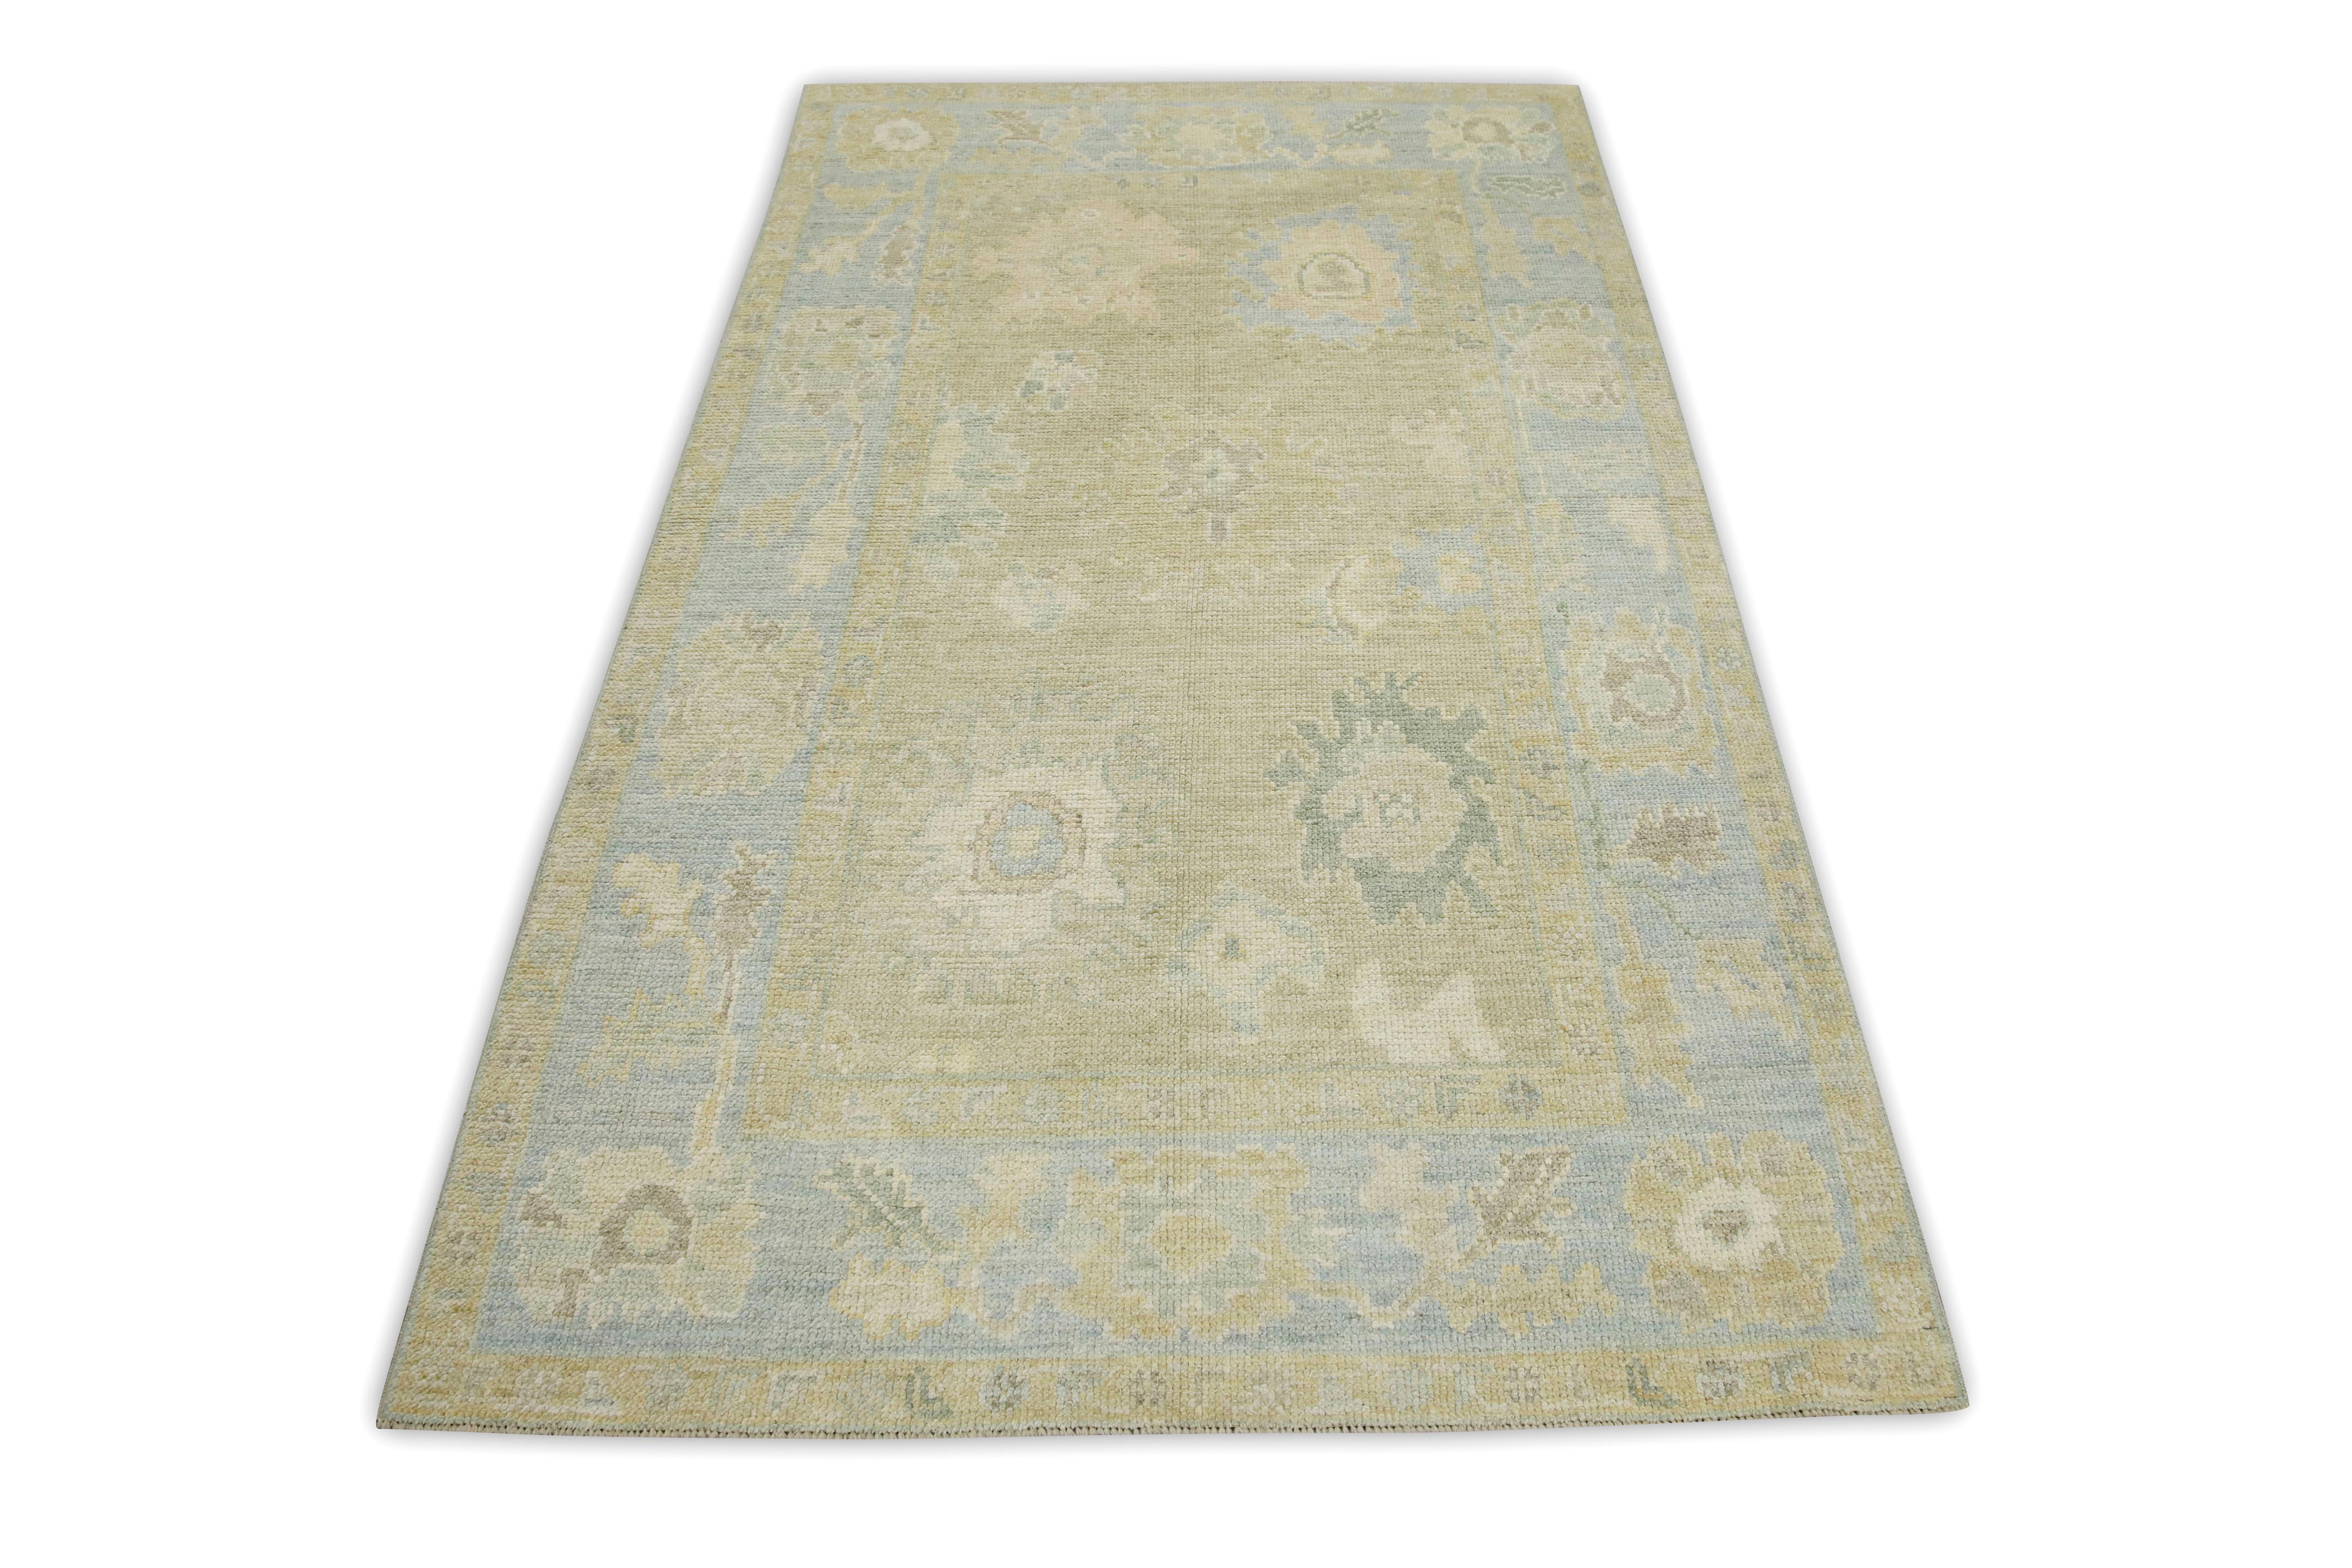 Contemporary Tan & Blue Floral Design Handwoven Wool Turkish Oushak Rug 4' x 6'8